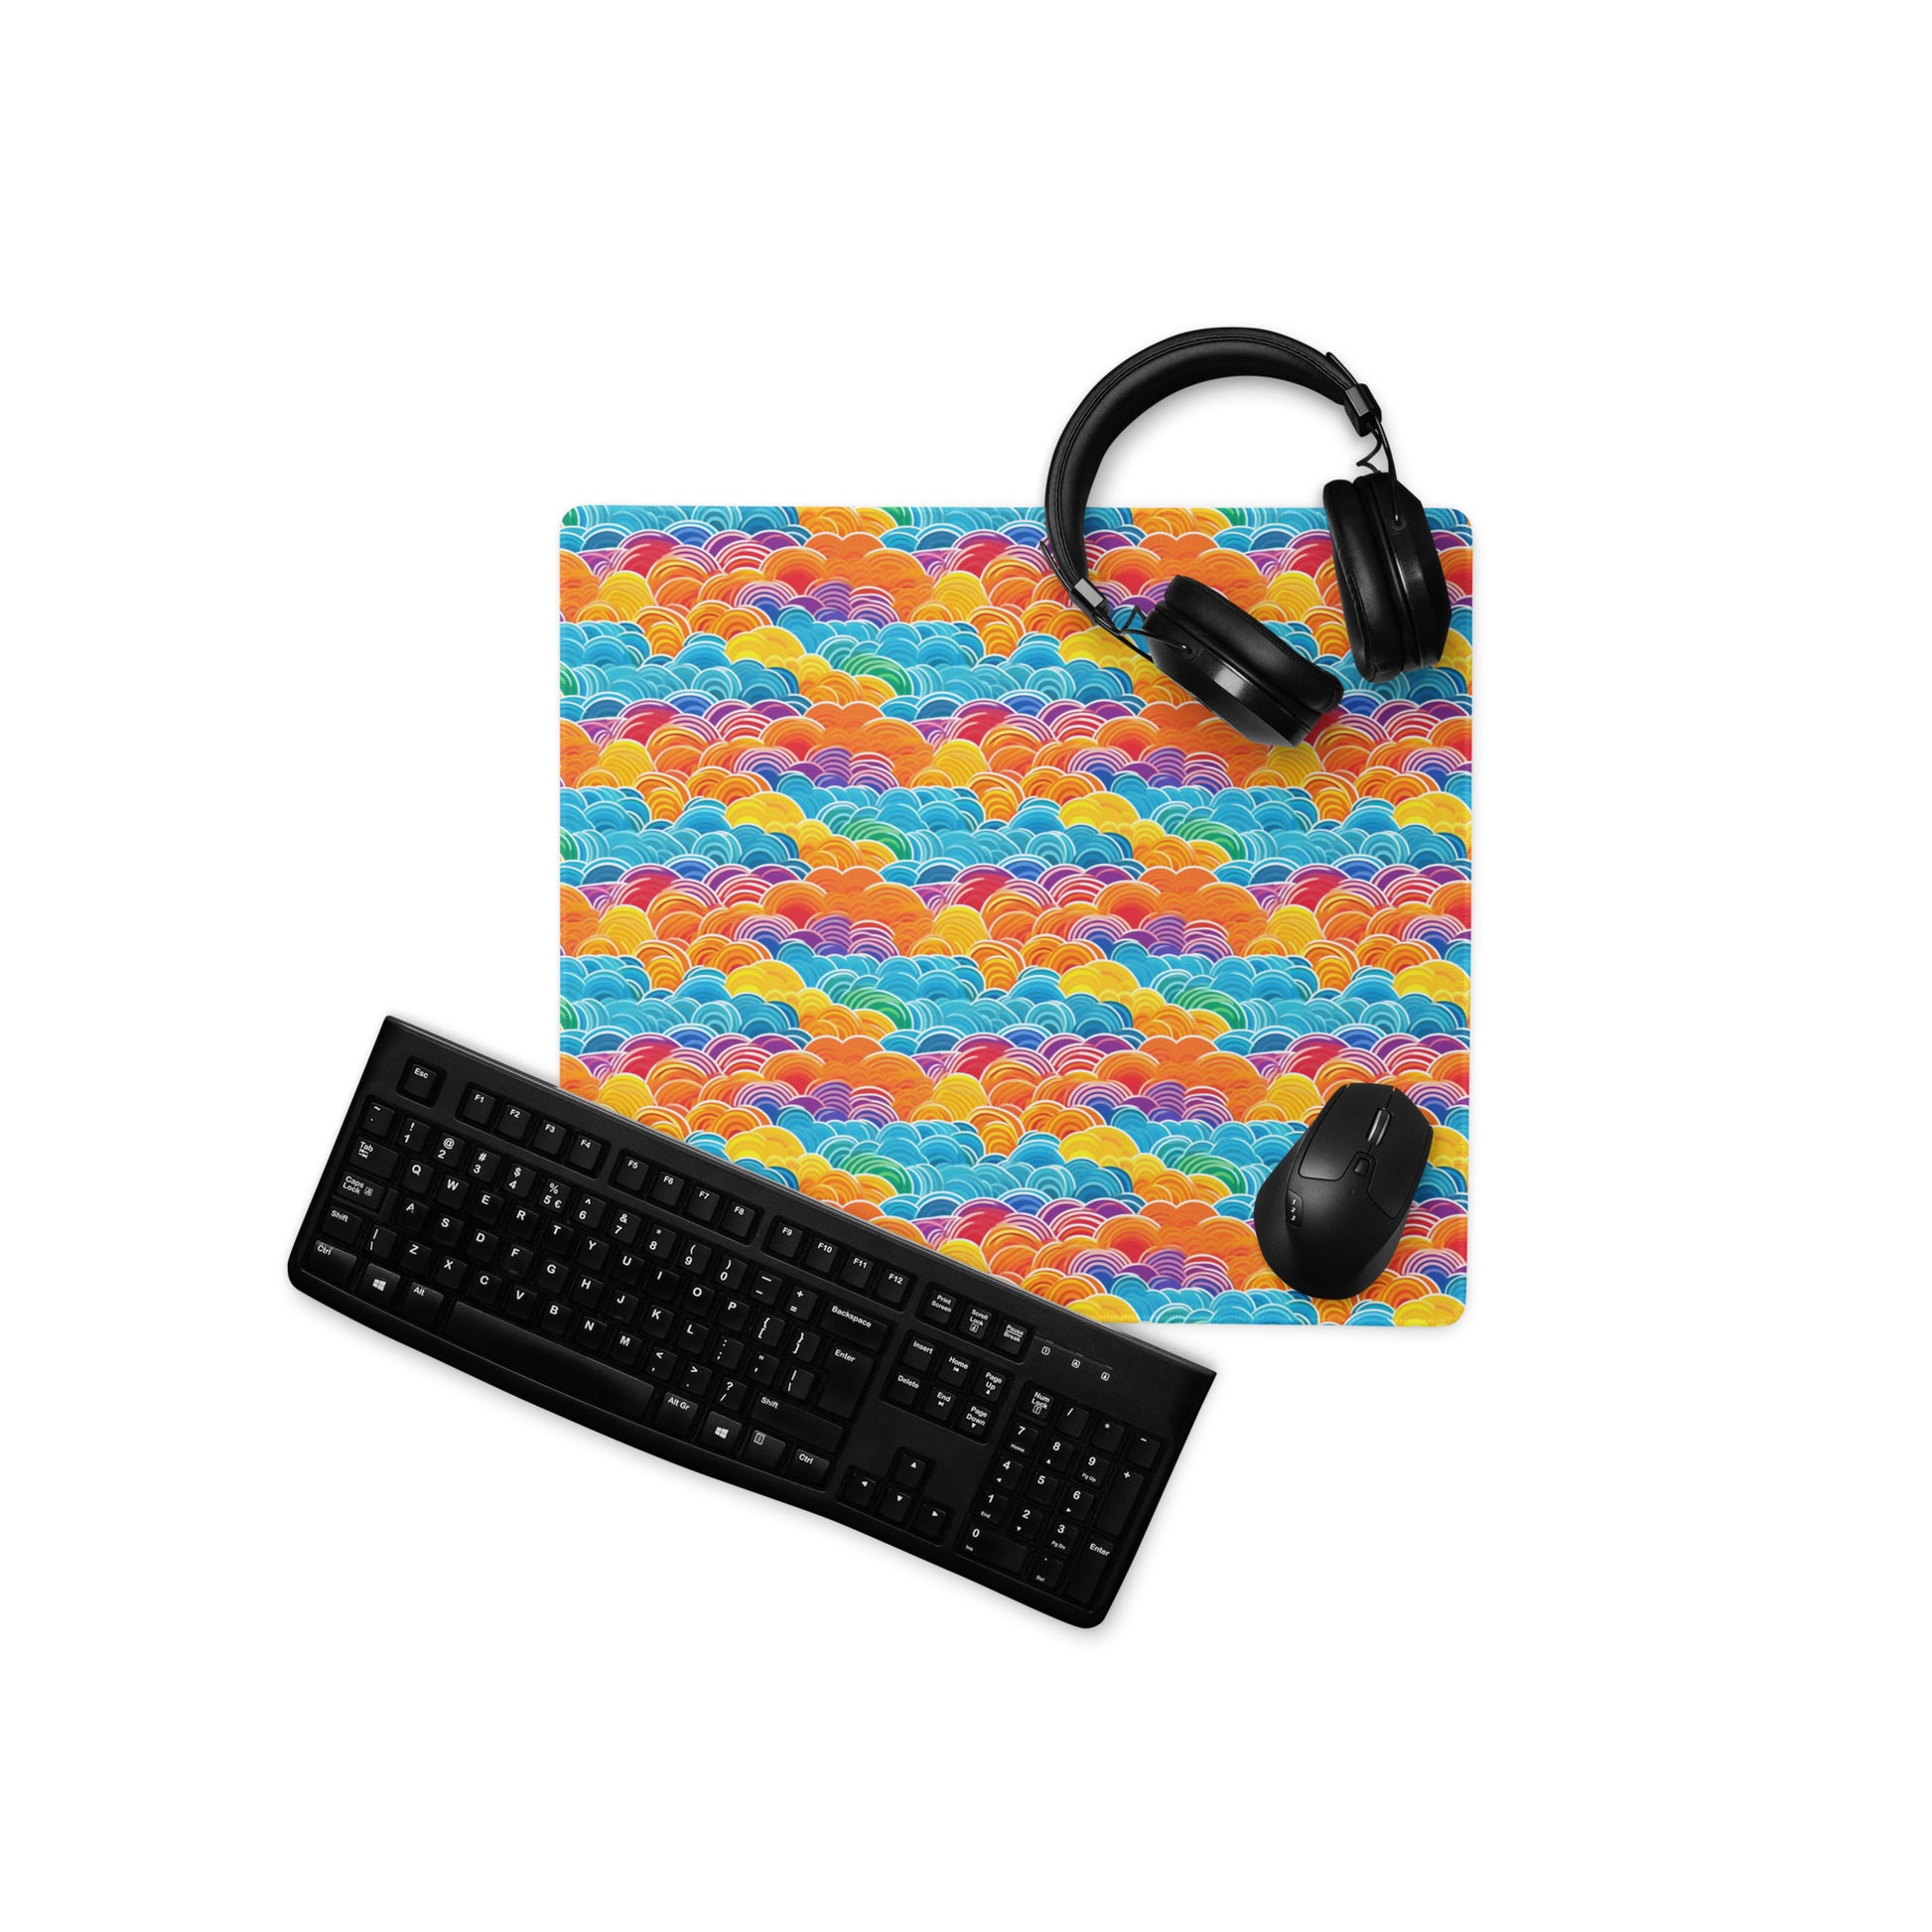 An 18" x 16" desk pad with bubbly swirly clouds all over it displayed with a keyboard, headphones and a mouse on it. Rainbow colored.